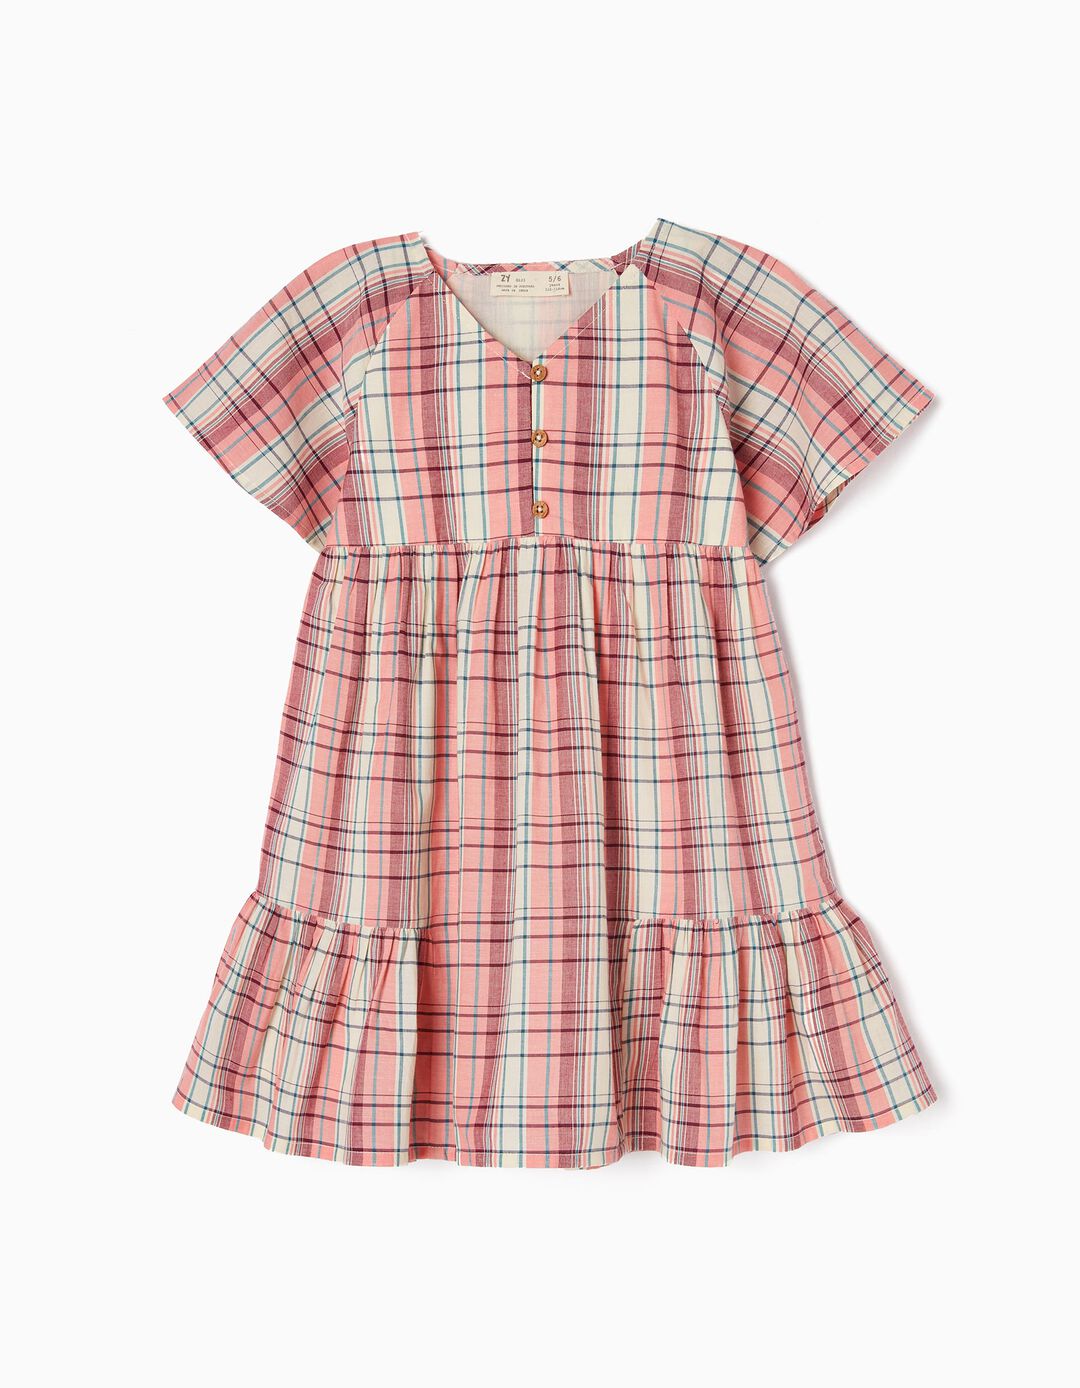 Plaid Cotton Dress for Girls, Pink 